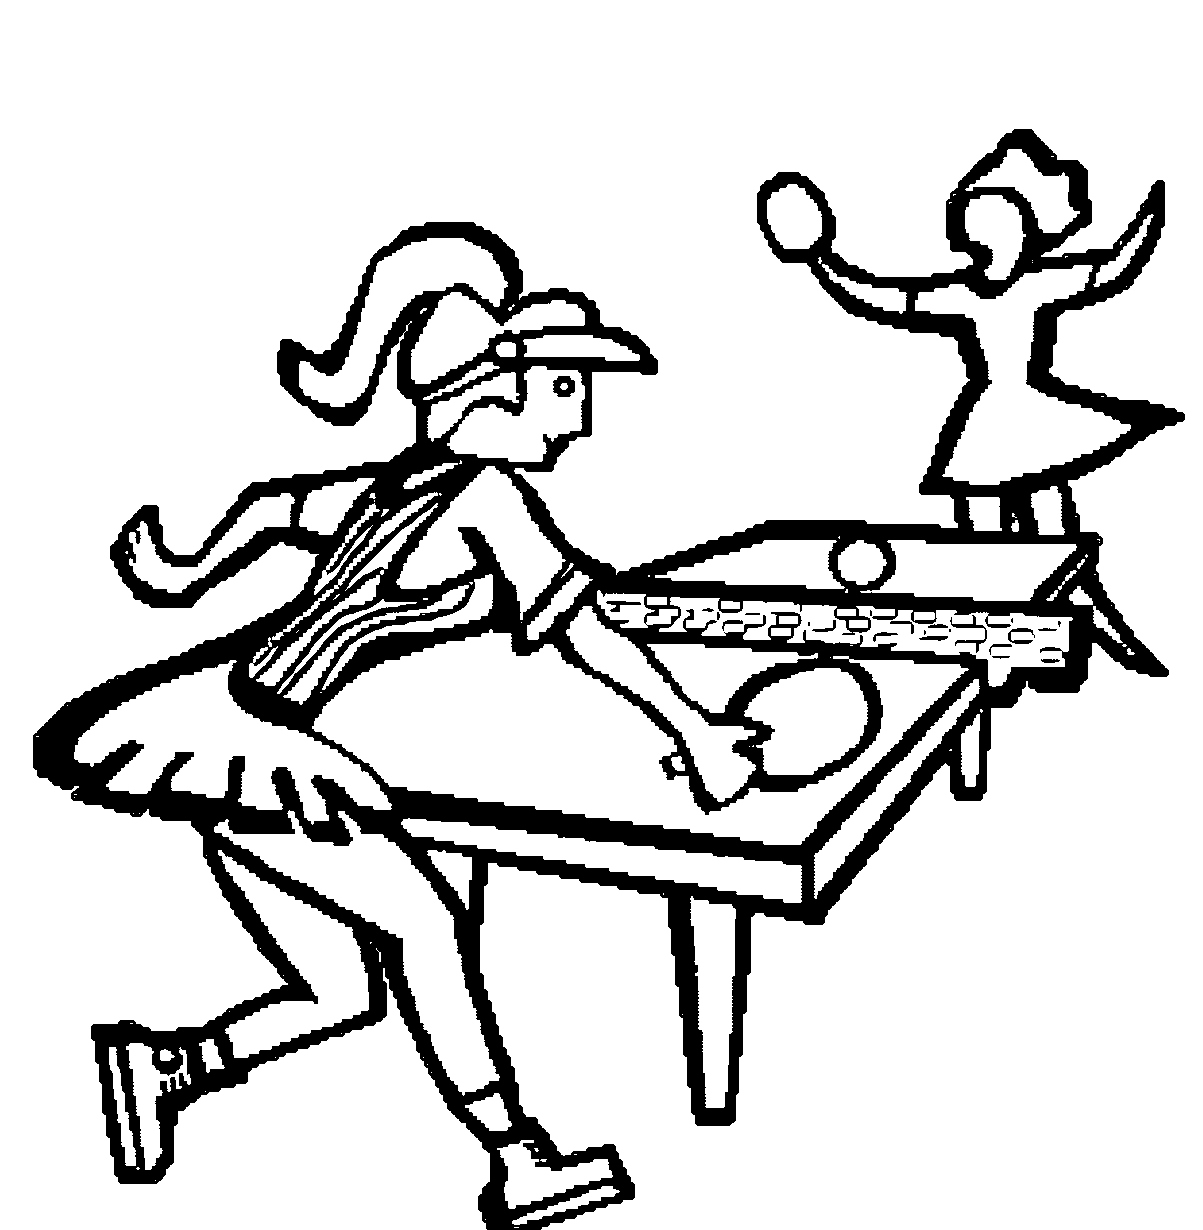 Playing Table Tennis Coloring Page | Wecoloringpage